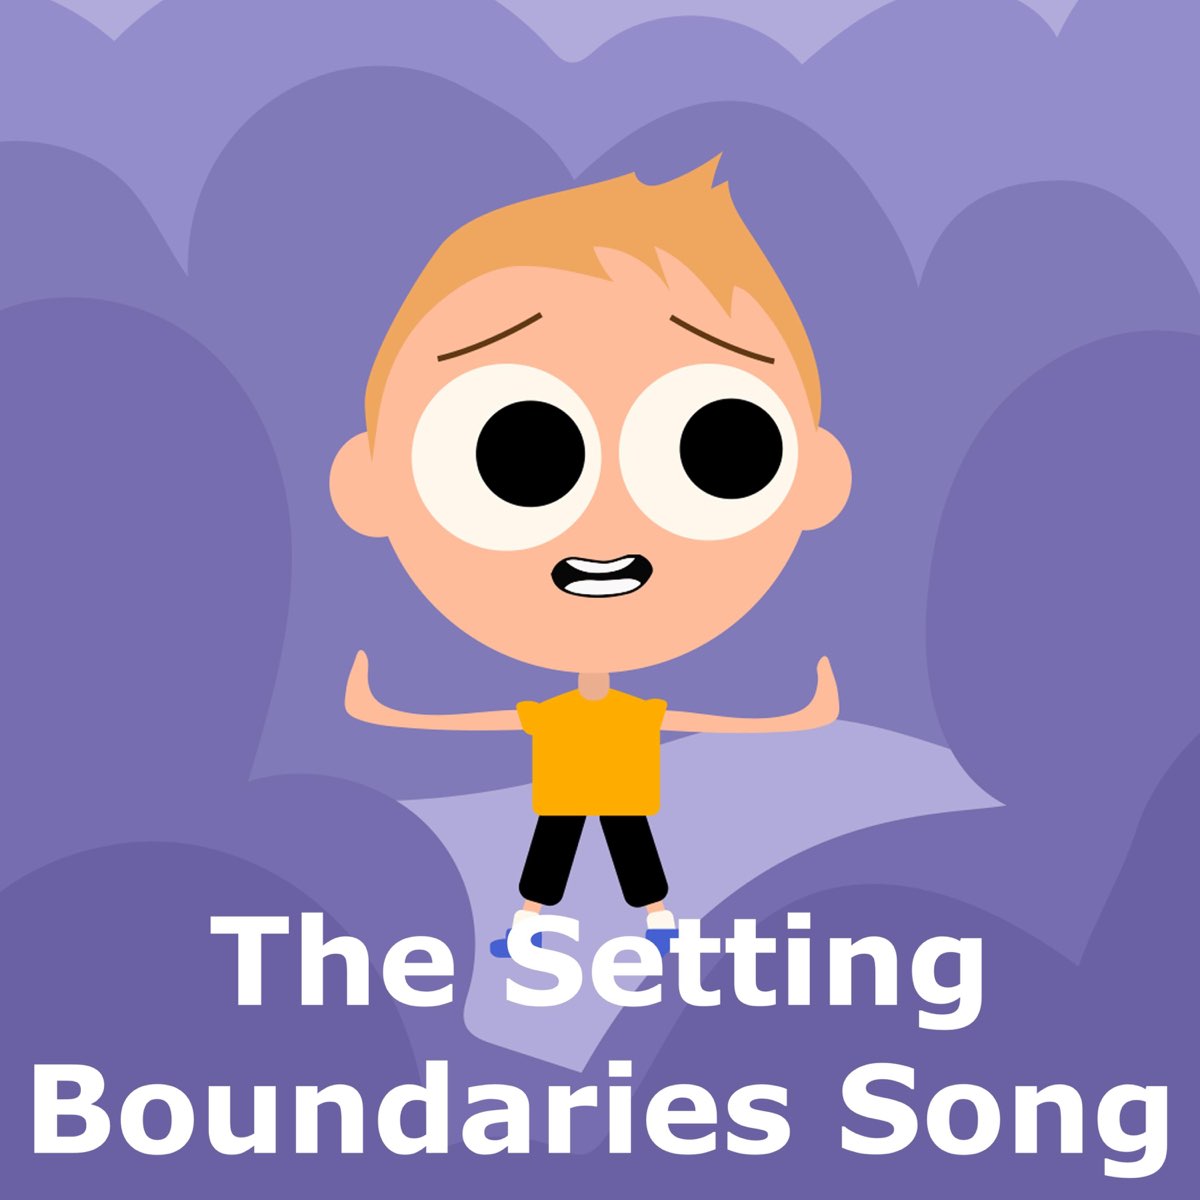 ‎The Setting Boundaries Song Single Album by Hopscotch Songs